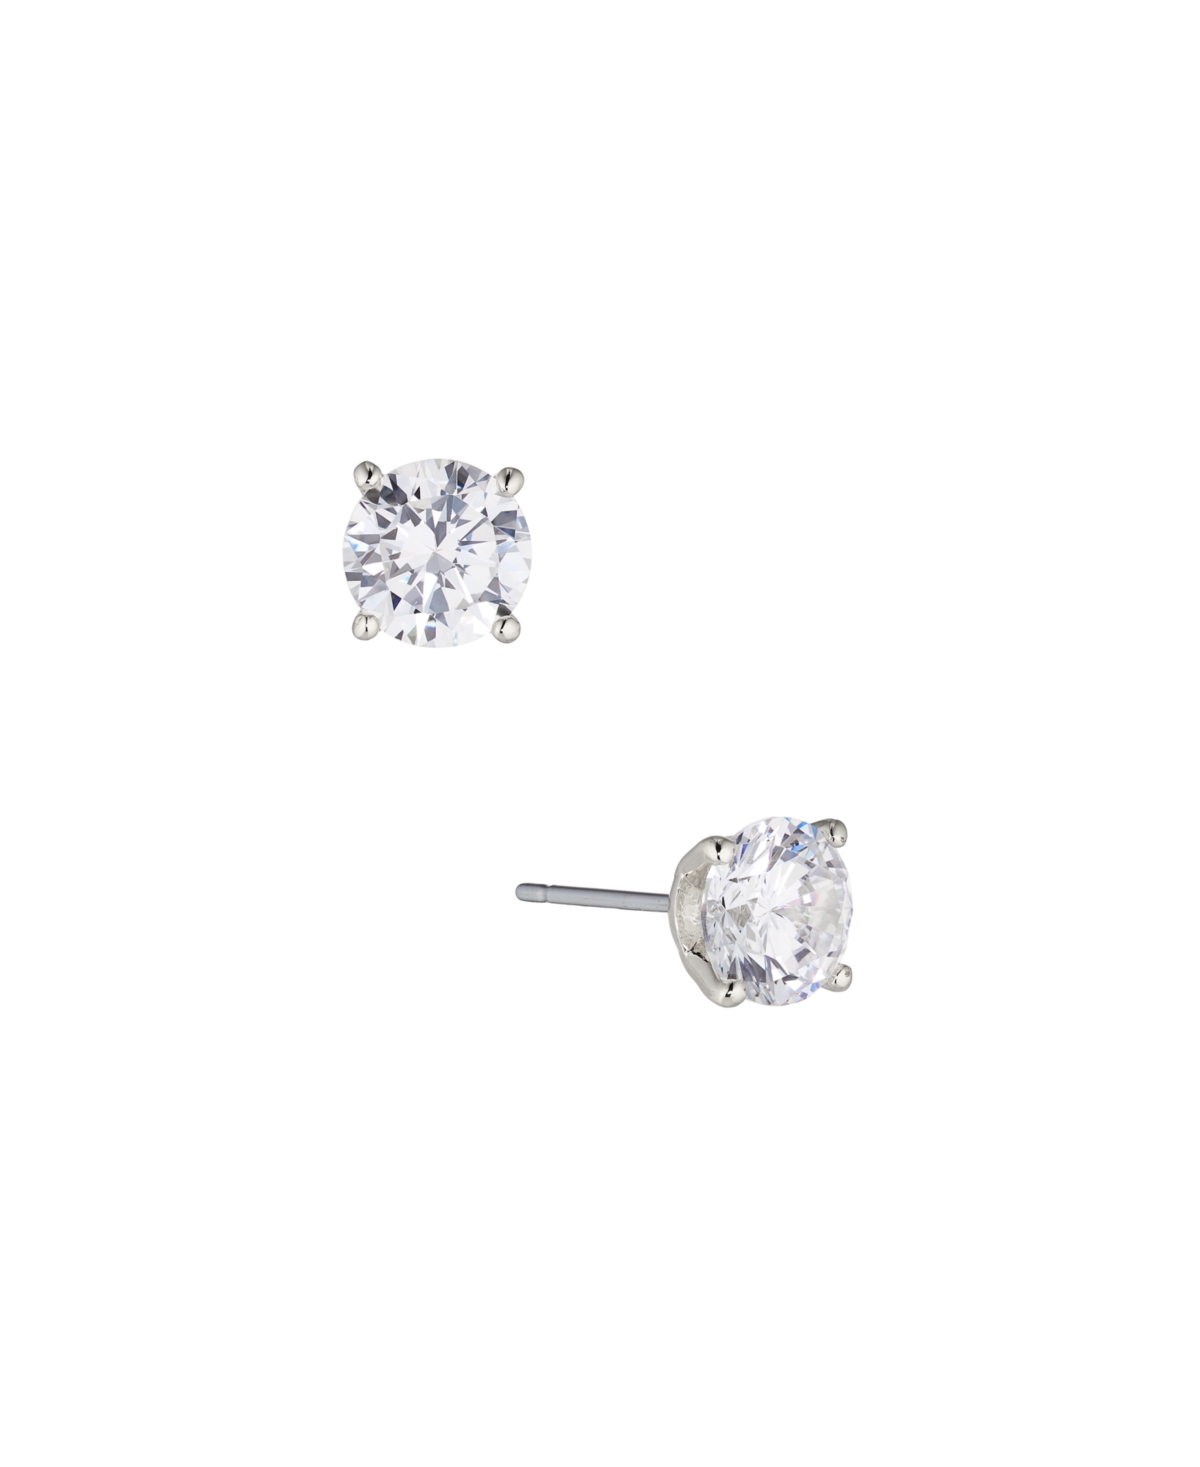 Rhodium Plated Earrings, Created for Macy's - Rhodium Plated